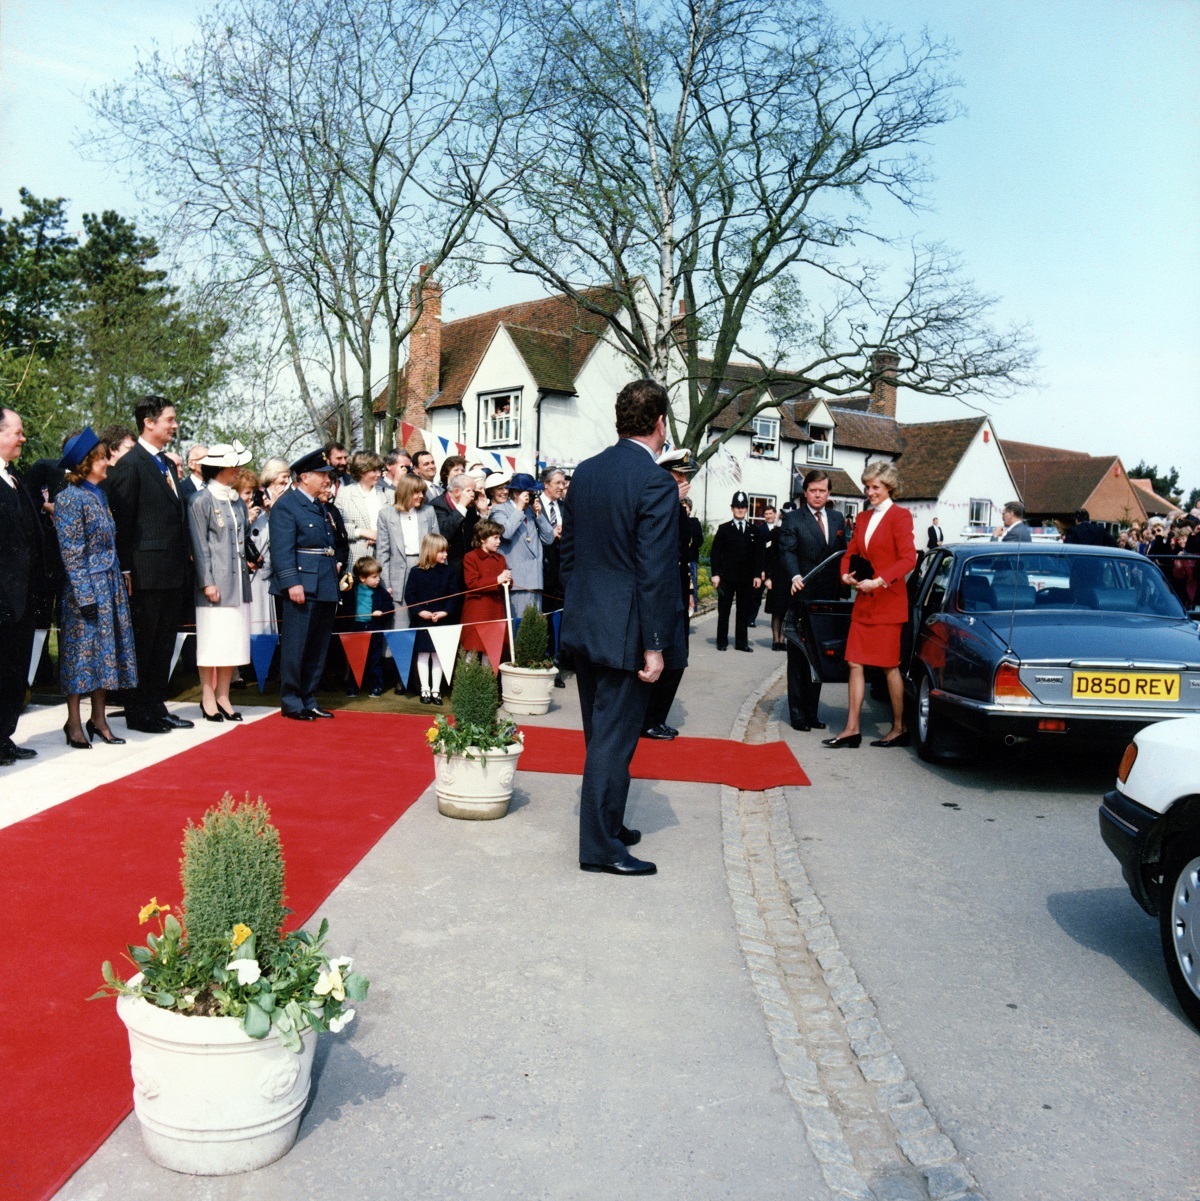 Big moment - Princess Diana arrives at St Helena Hospice, ready to step onto the red carpet leading to the Joan Tomkins day centre